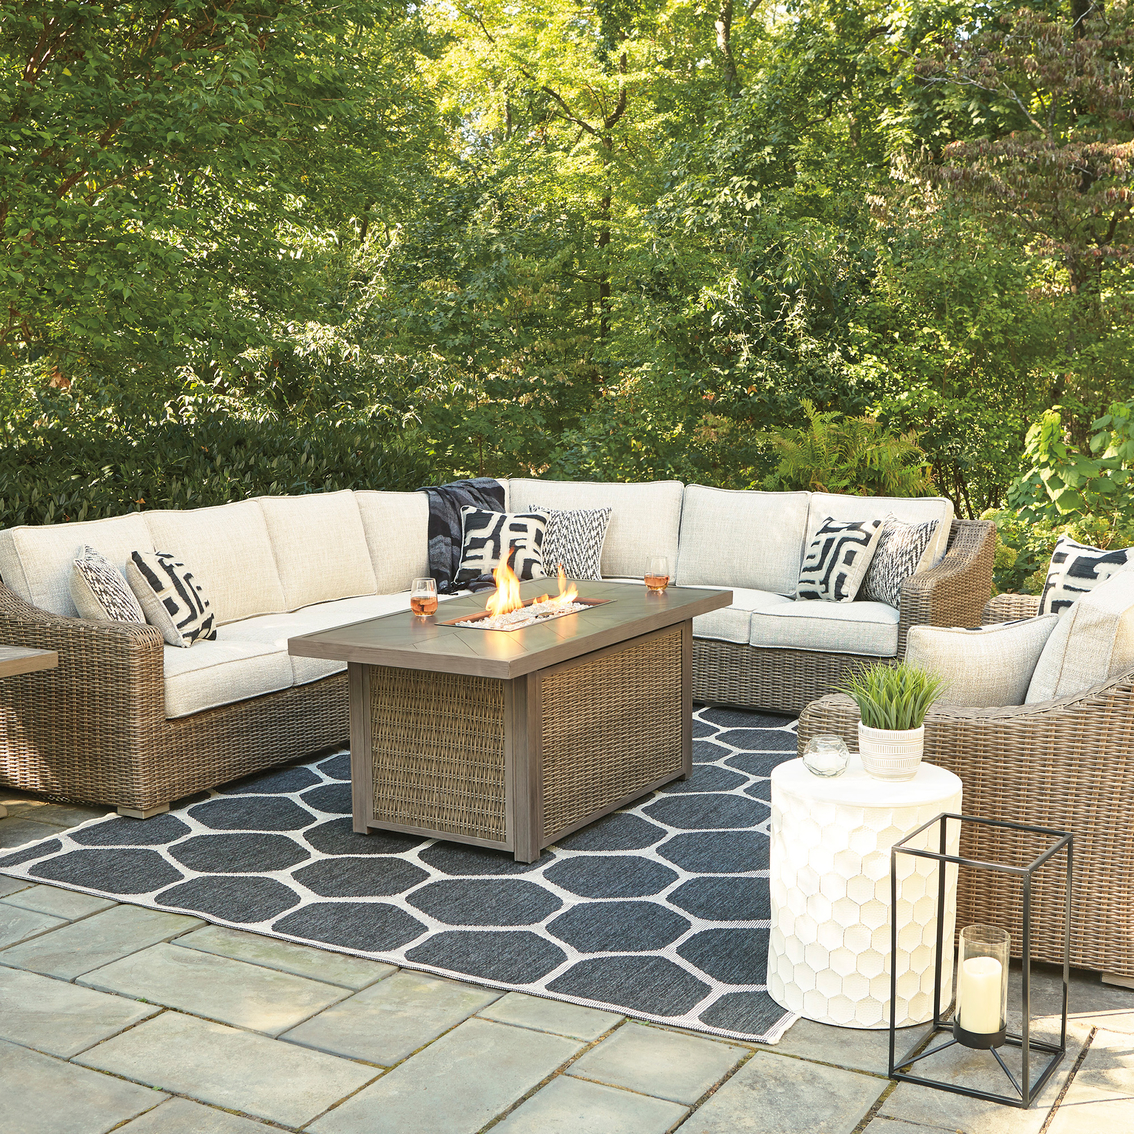 Signature Design by Ashley Beachcroft 6 pc. Outdoor Sectional - Image 2 of 4